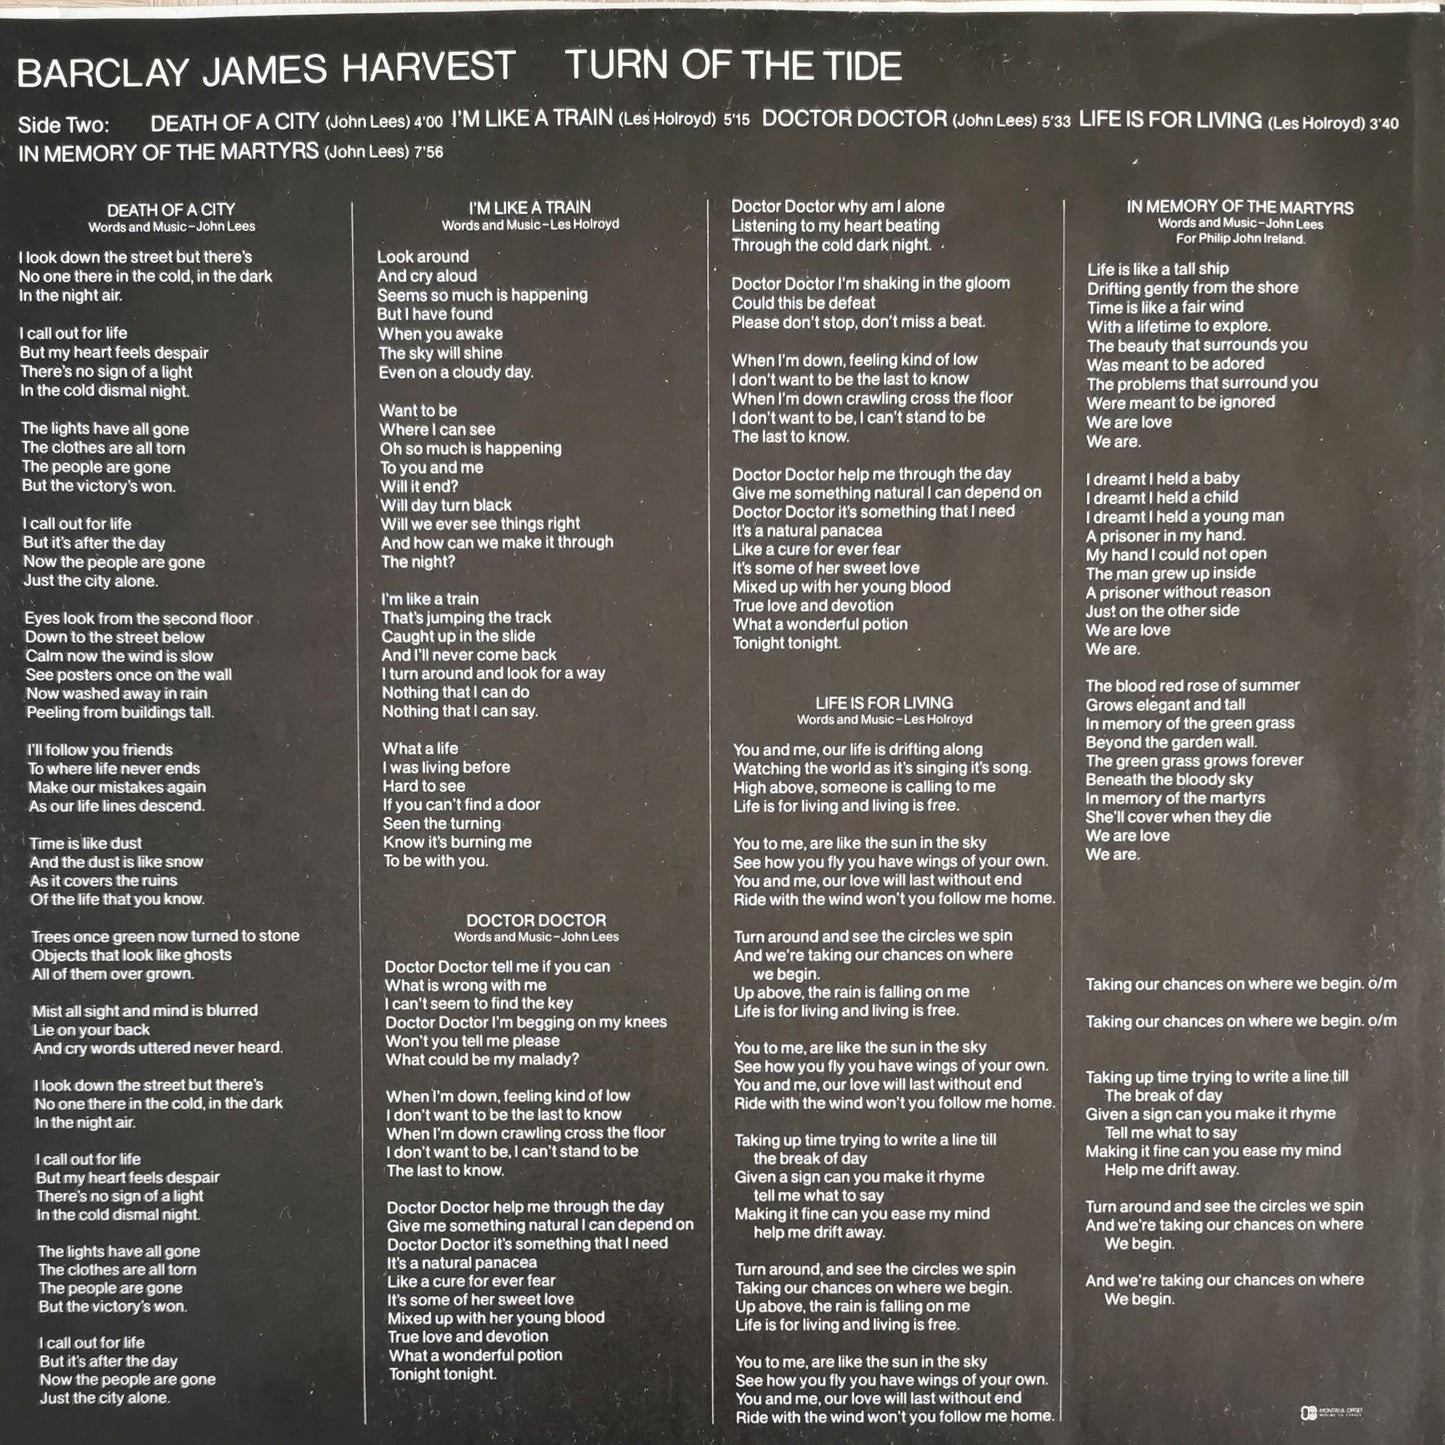 BARCLAY JAMES HARVEST - Turn of the Tide